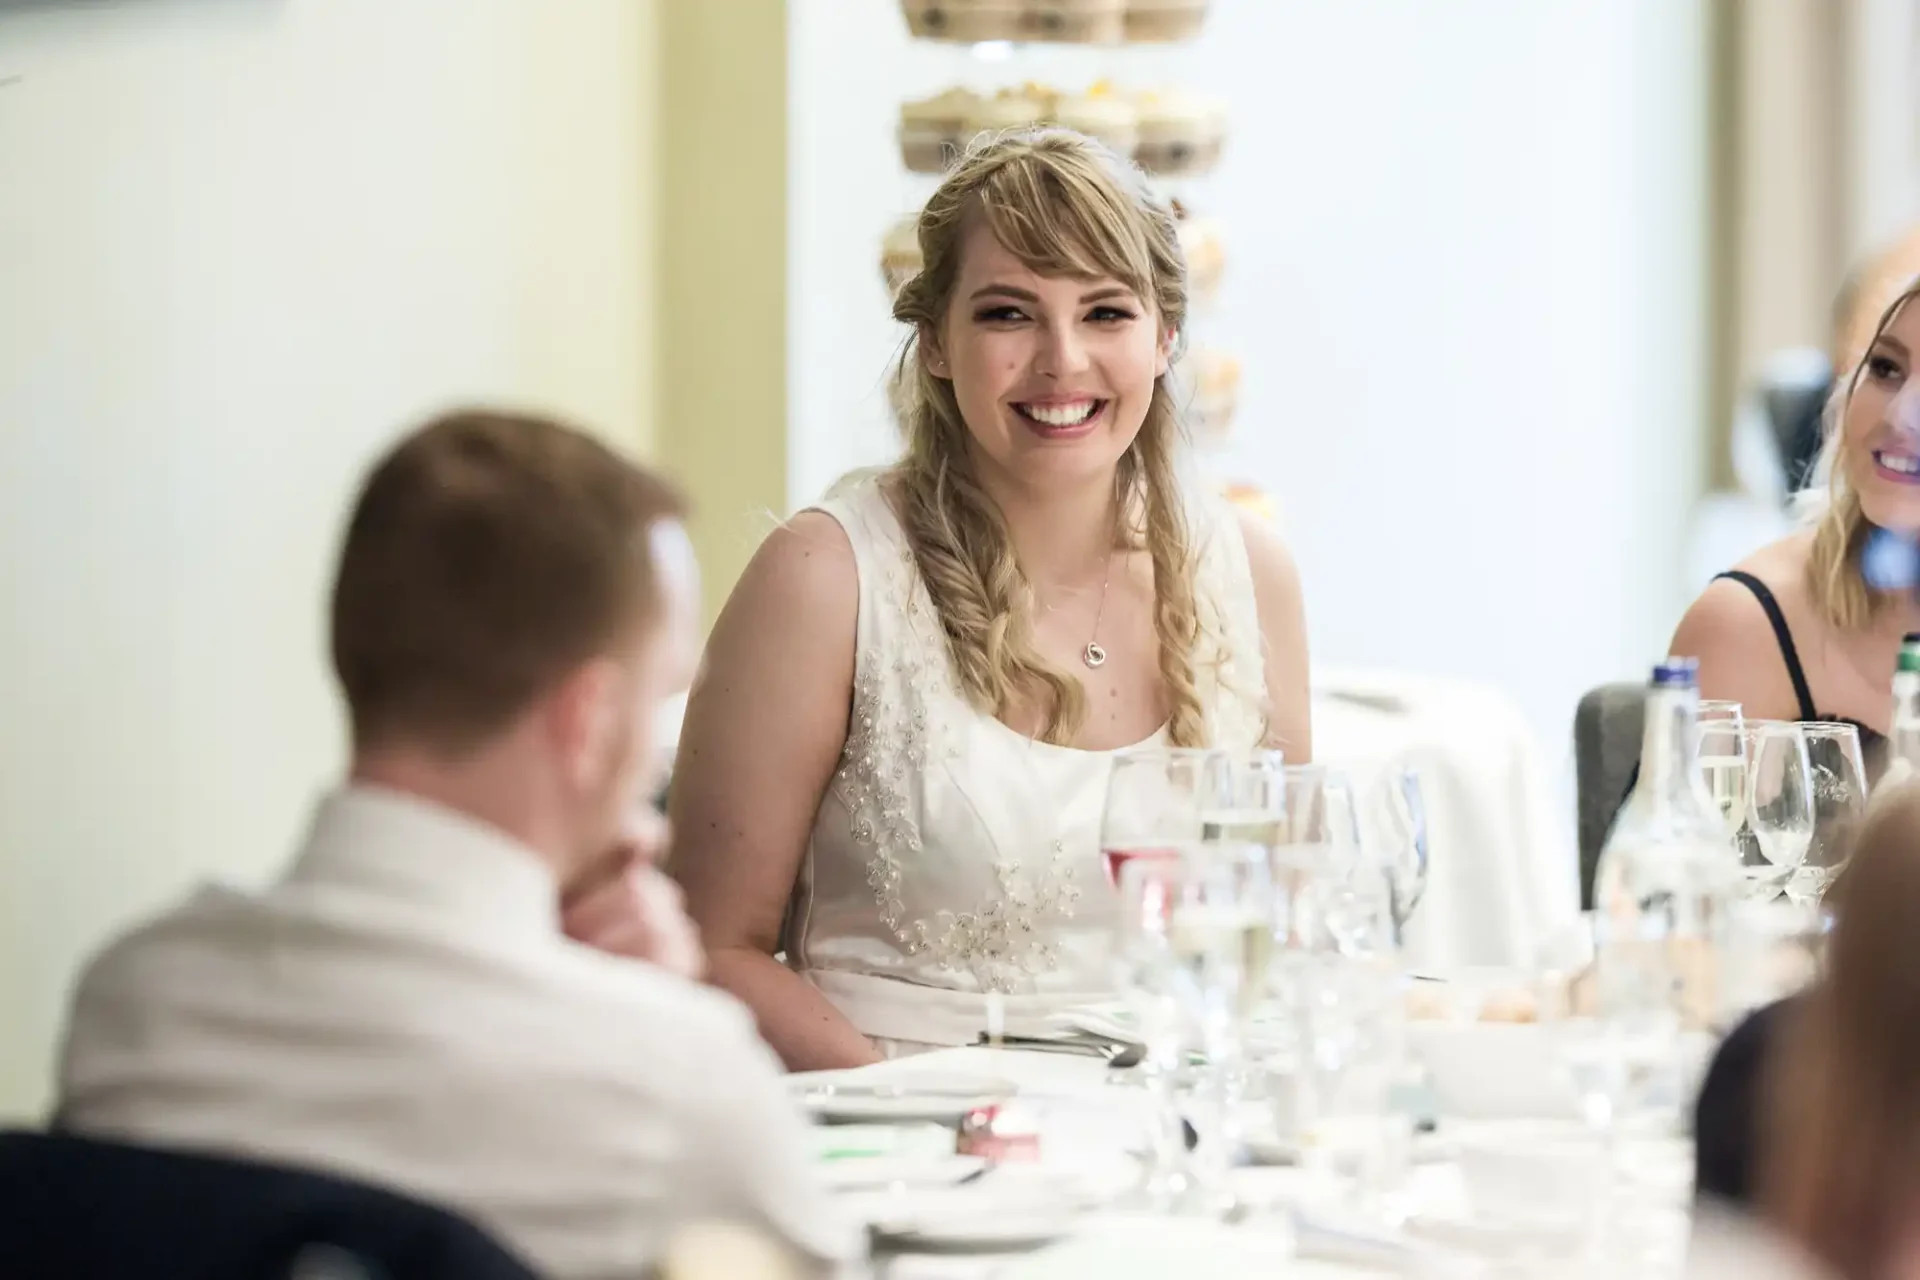 A bride smiling at a wedding reception table while guests interact around her.